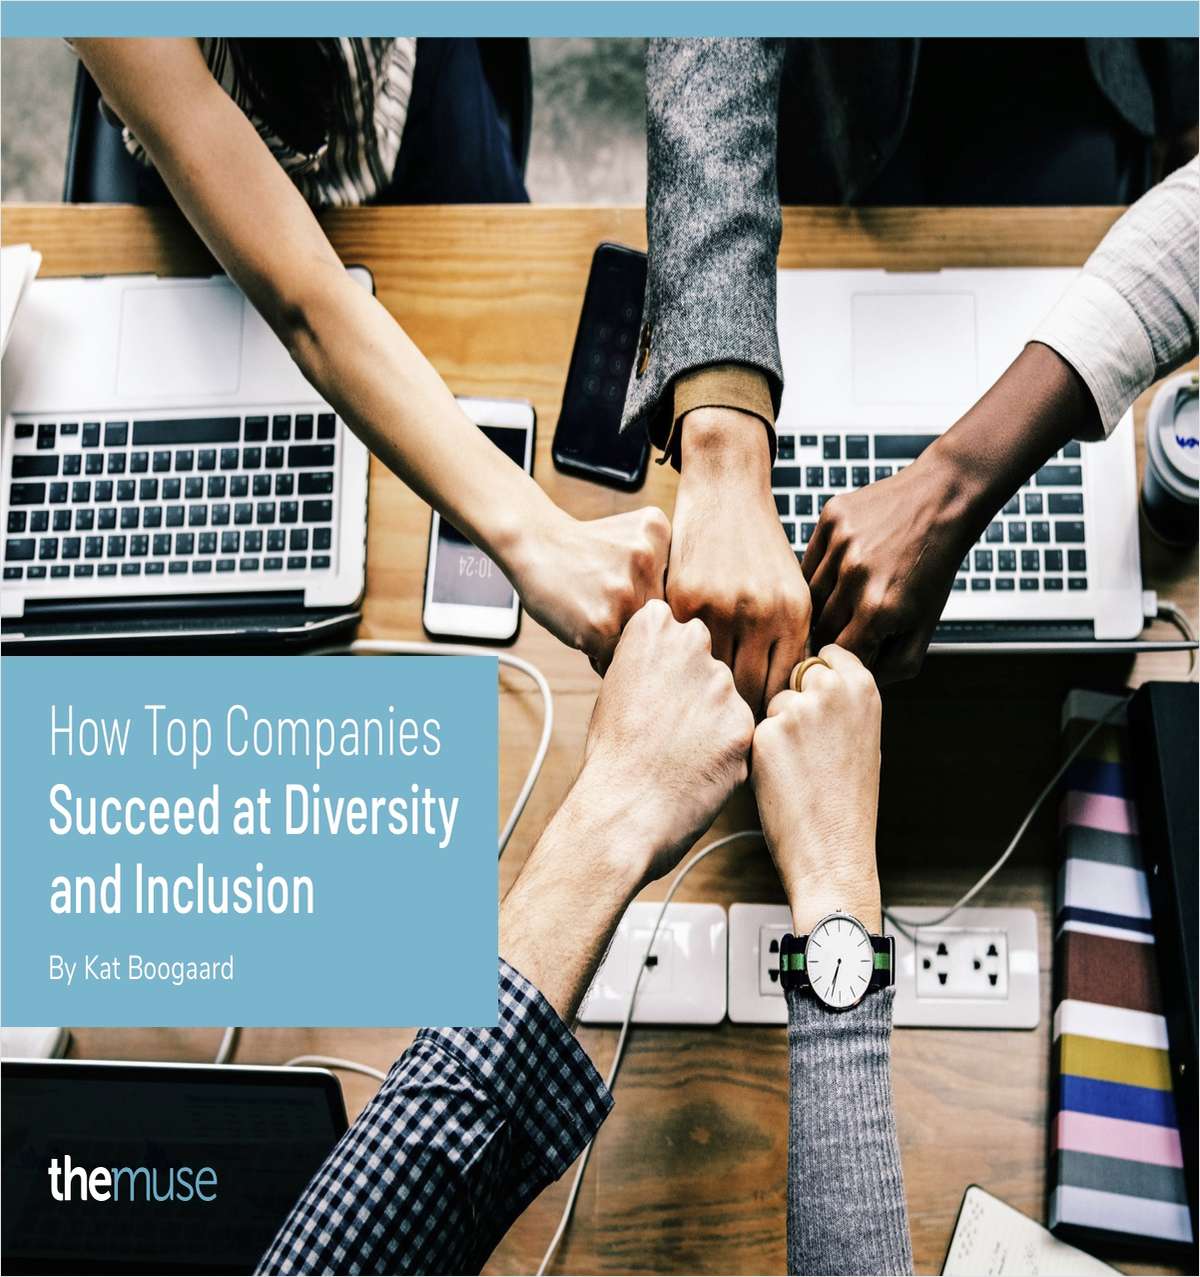 How Top Companies Succeed at Diversity and Inclusion